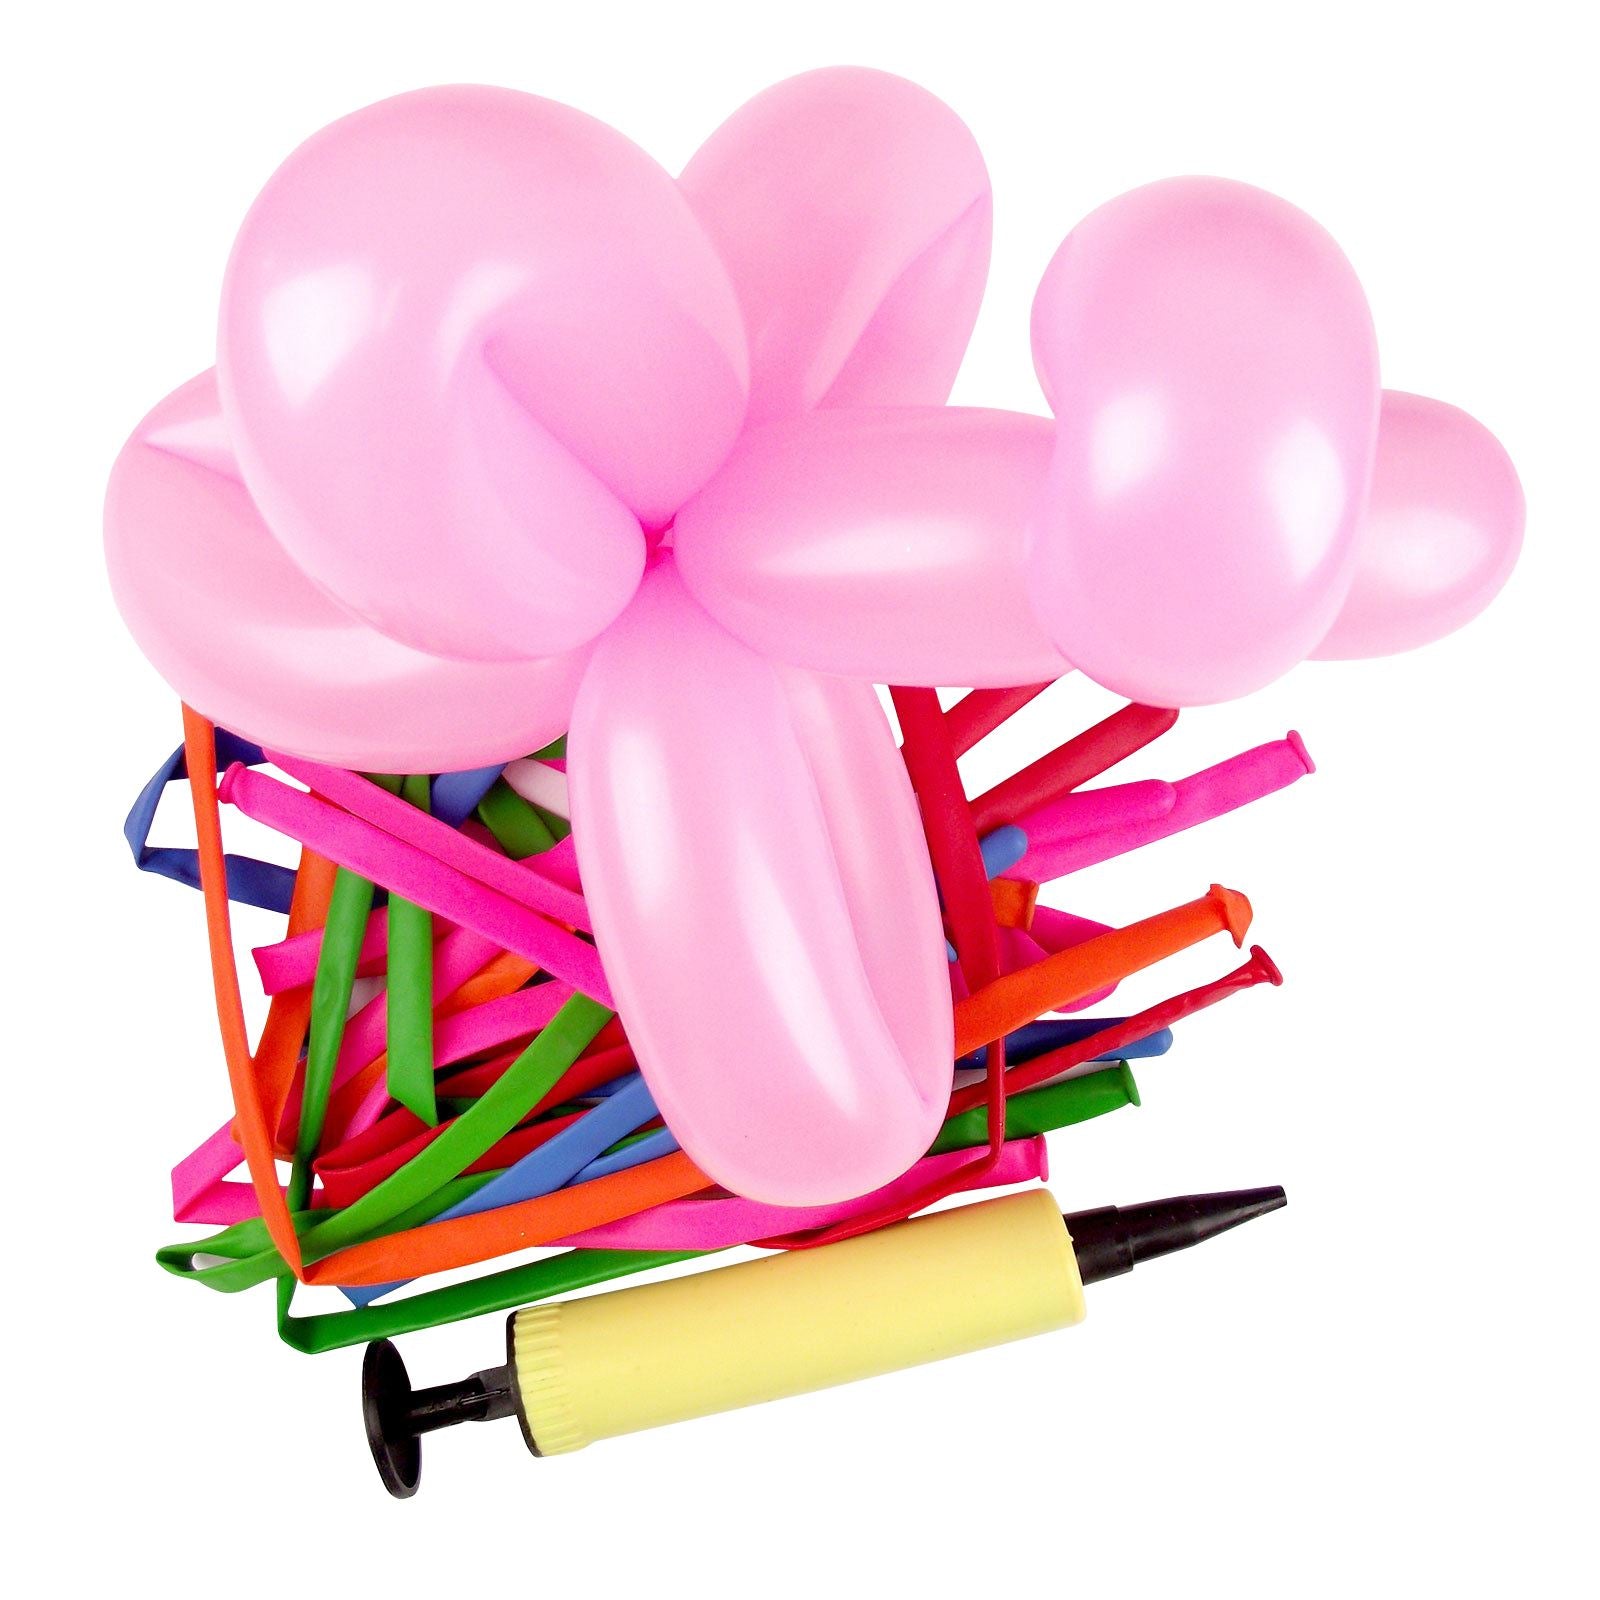 3x Packs of Modelling Balloons with Pumps